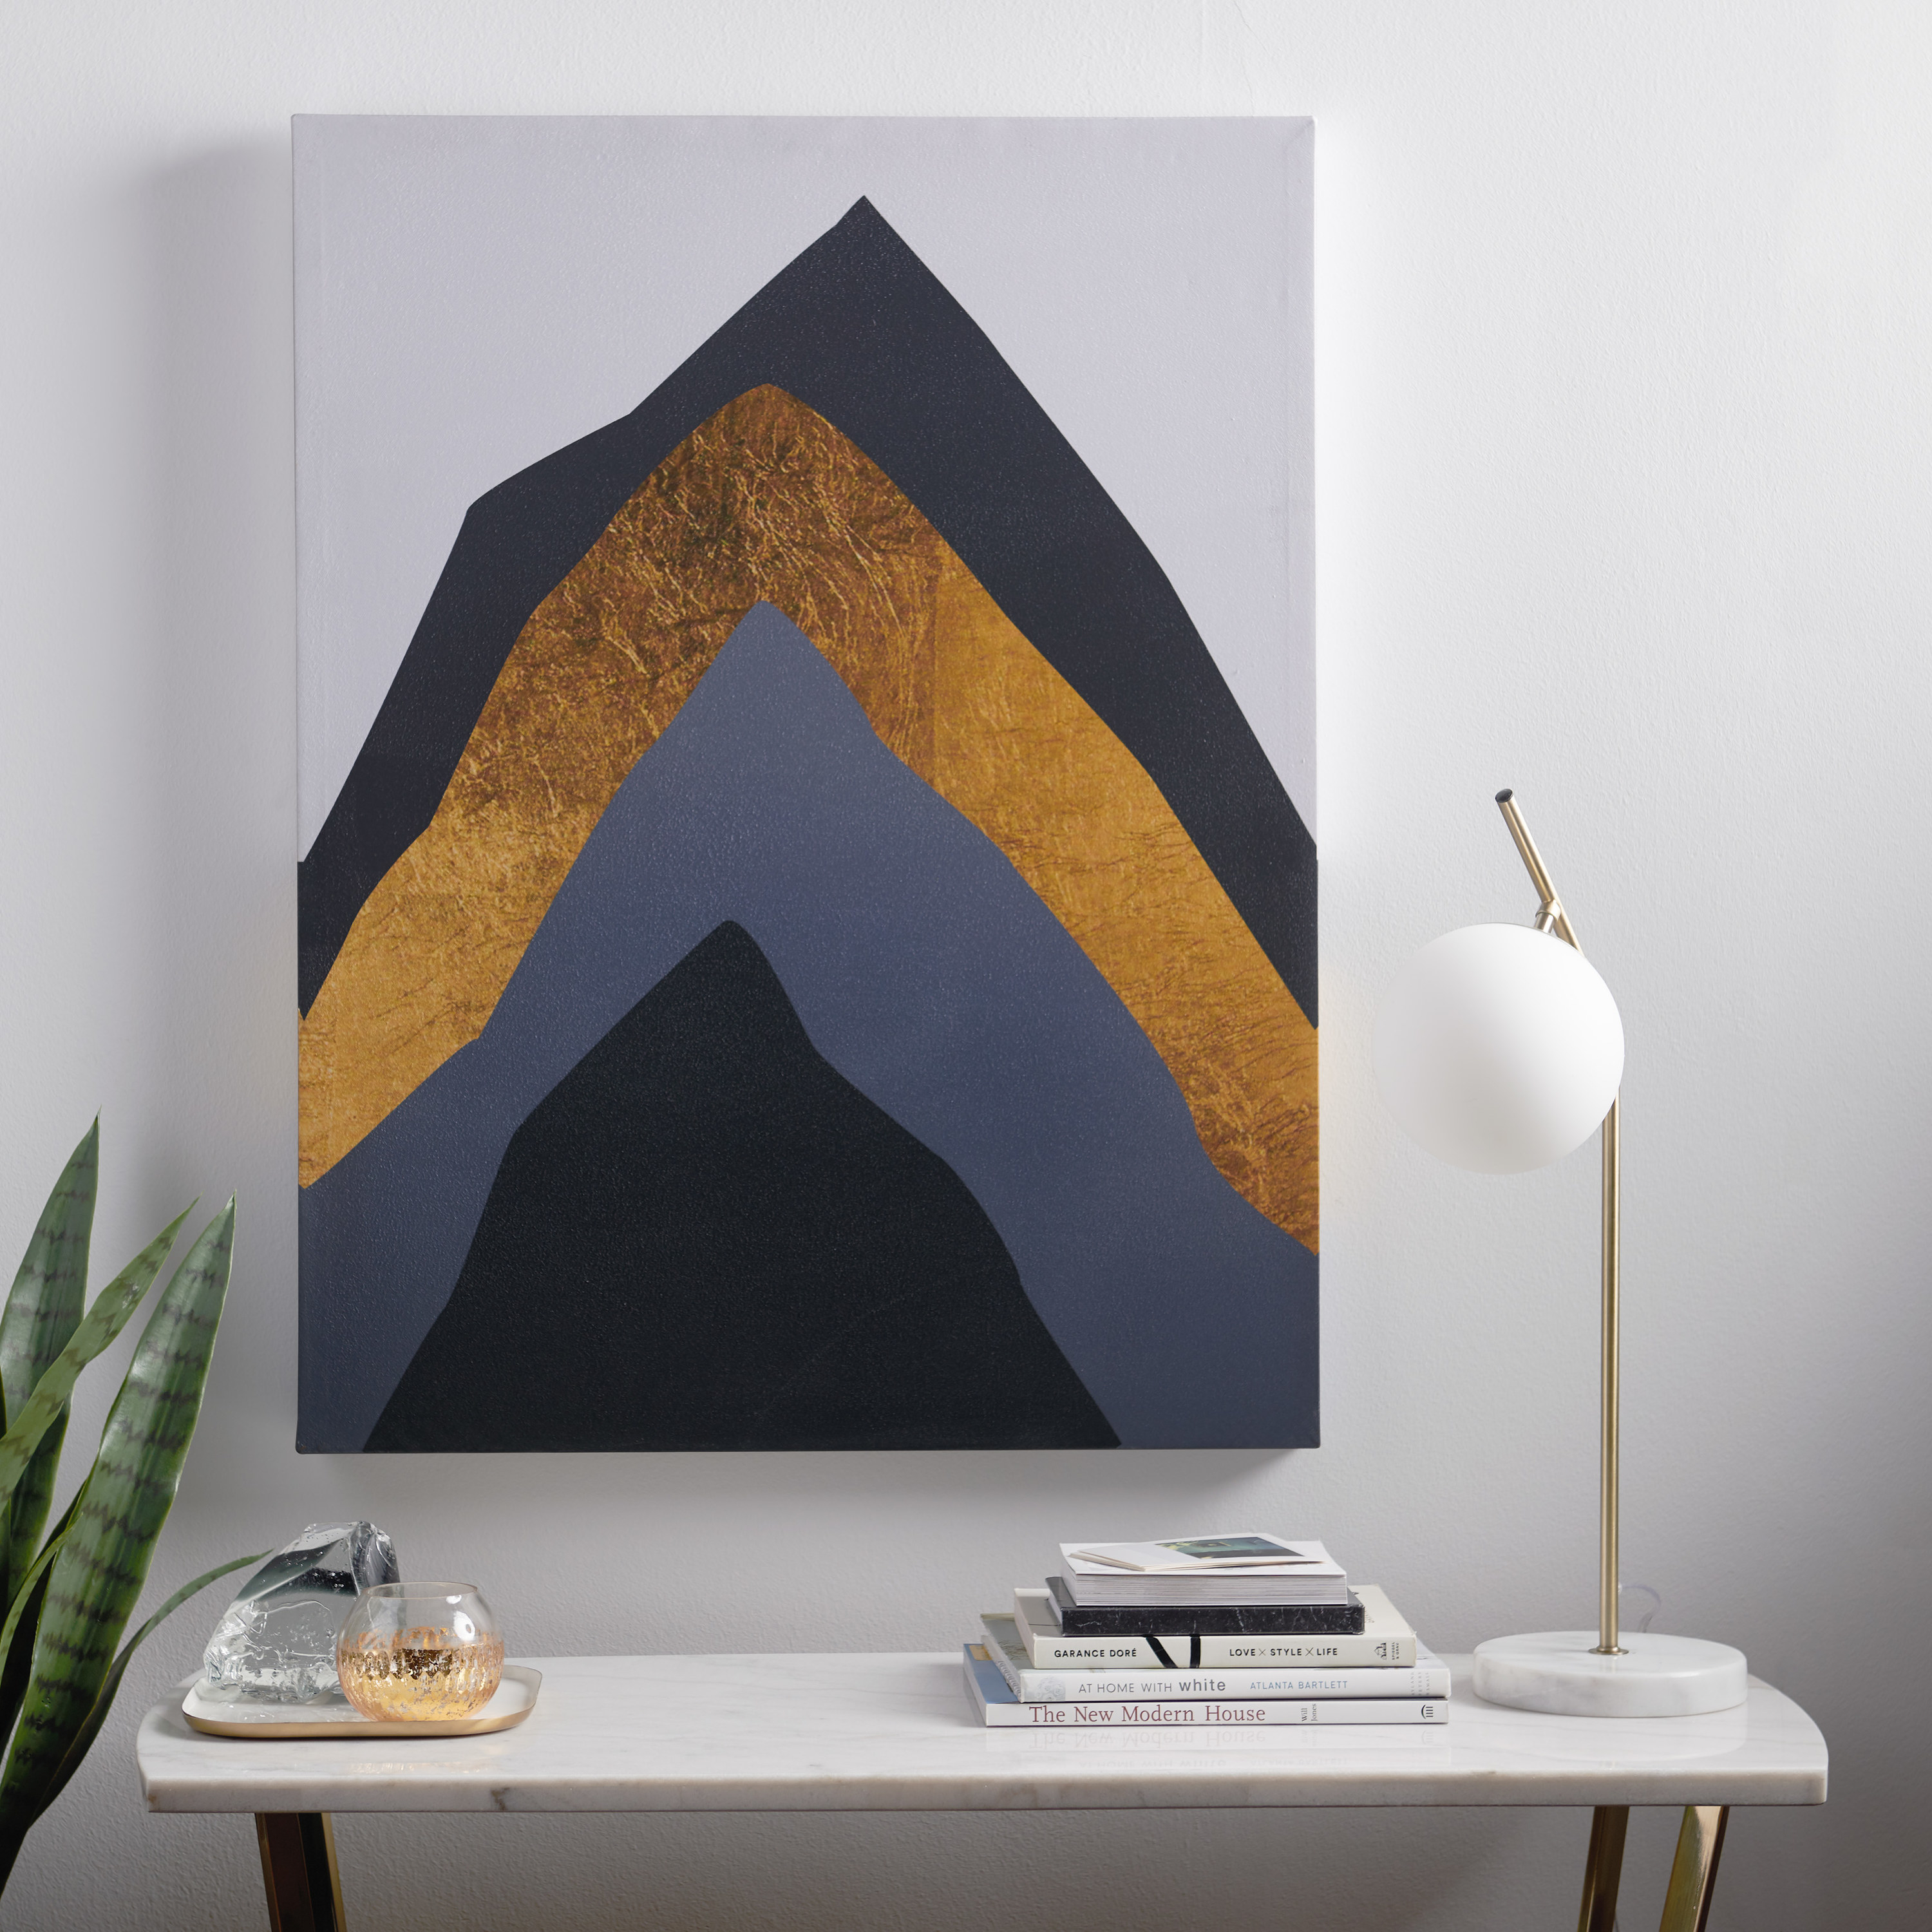 The print, which looks like mountains or a cut-open geode, rendered in black, gray, and gold